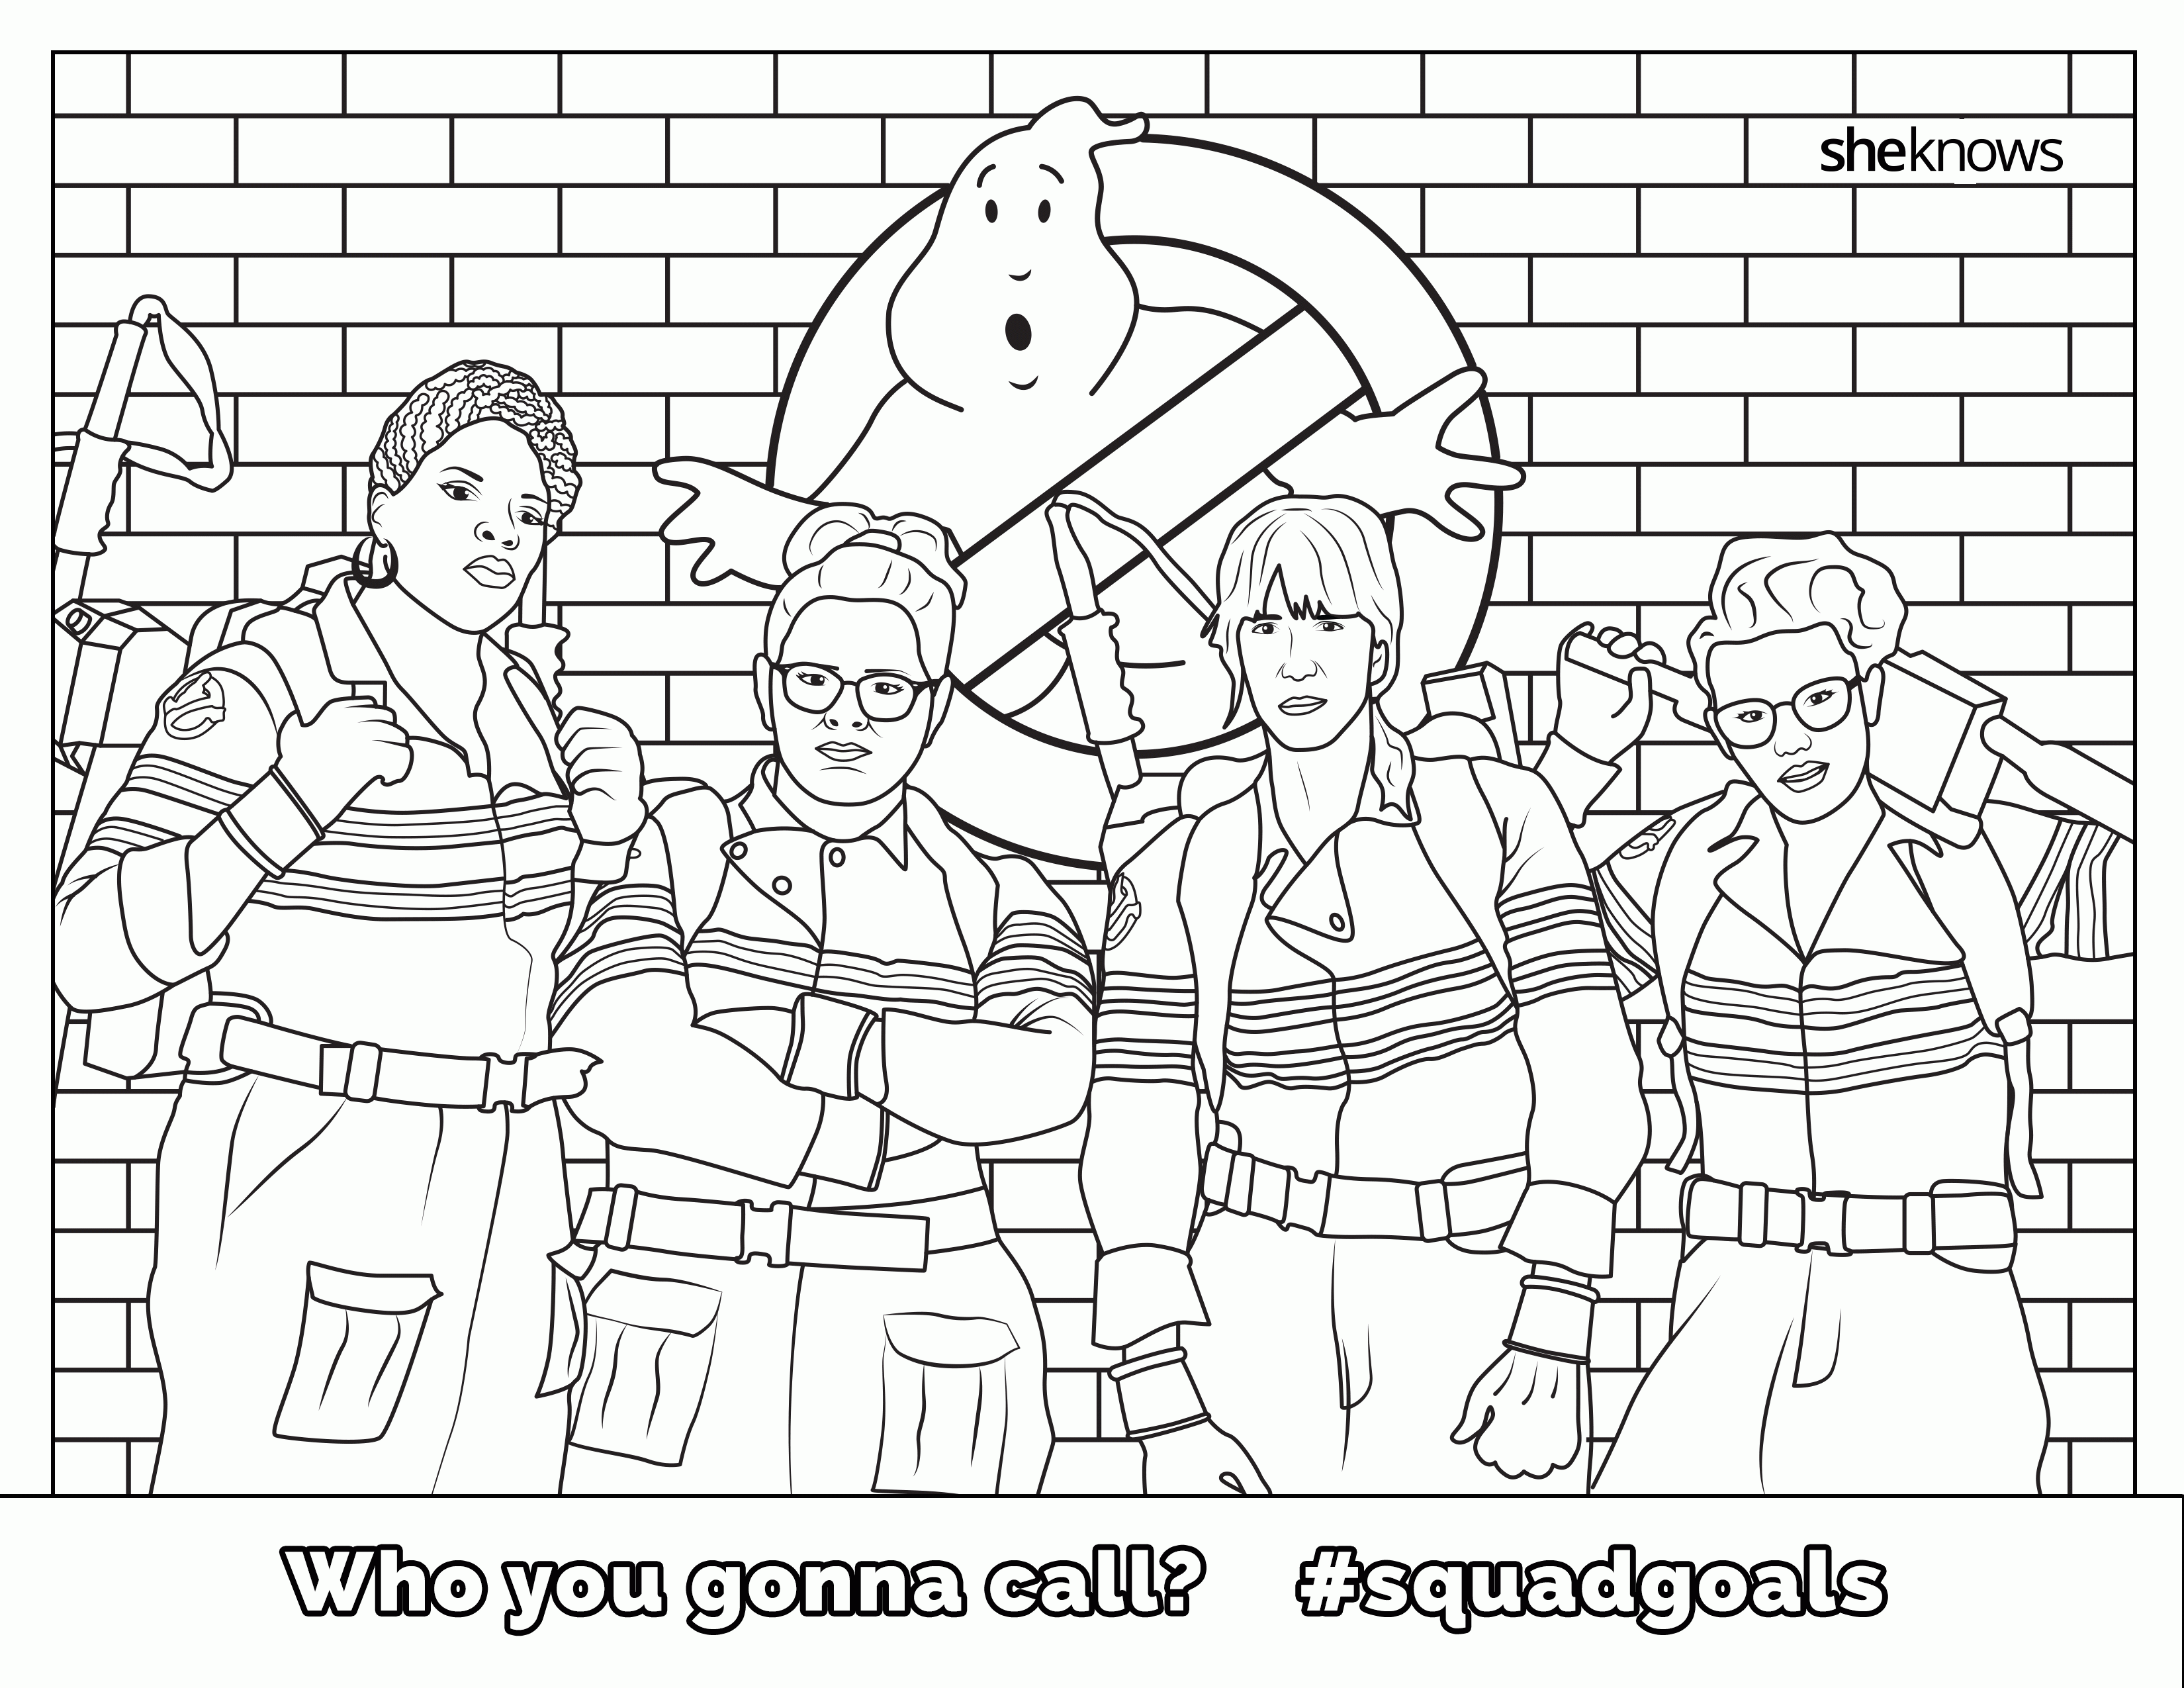 The Ultimate #SquadGoals Coloring Book � print it, color it, live